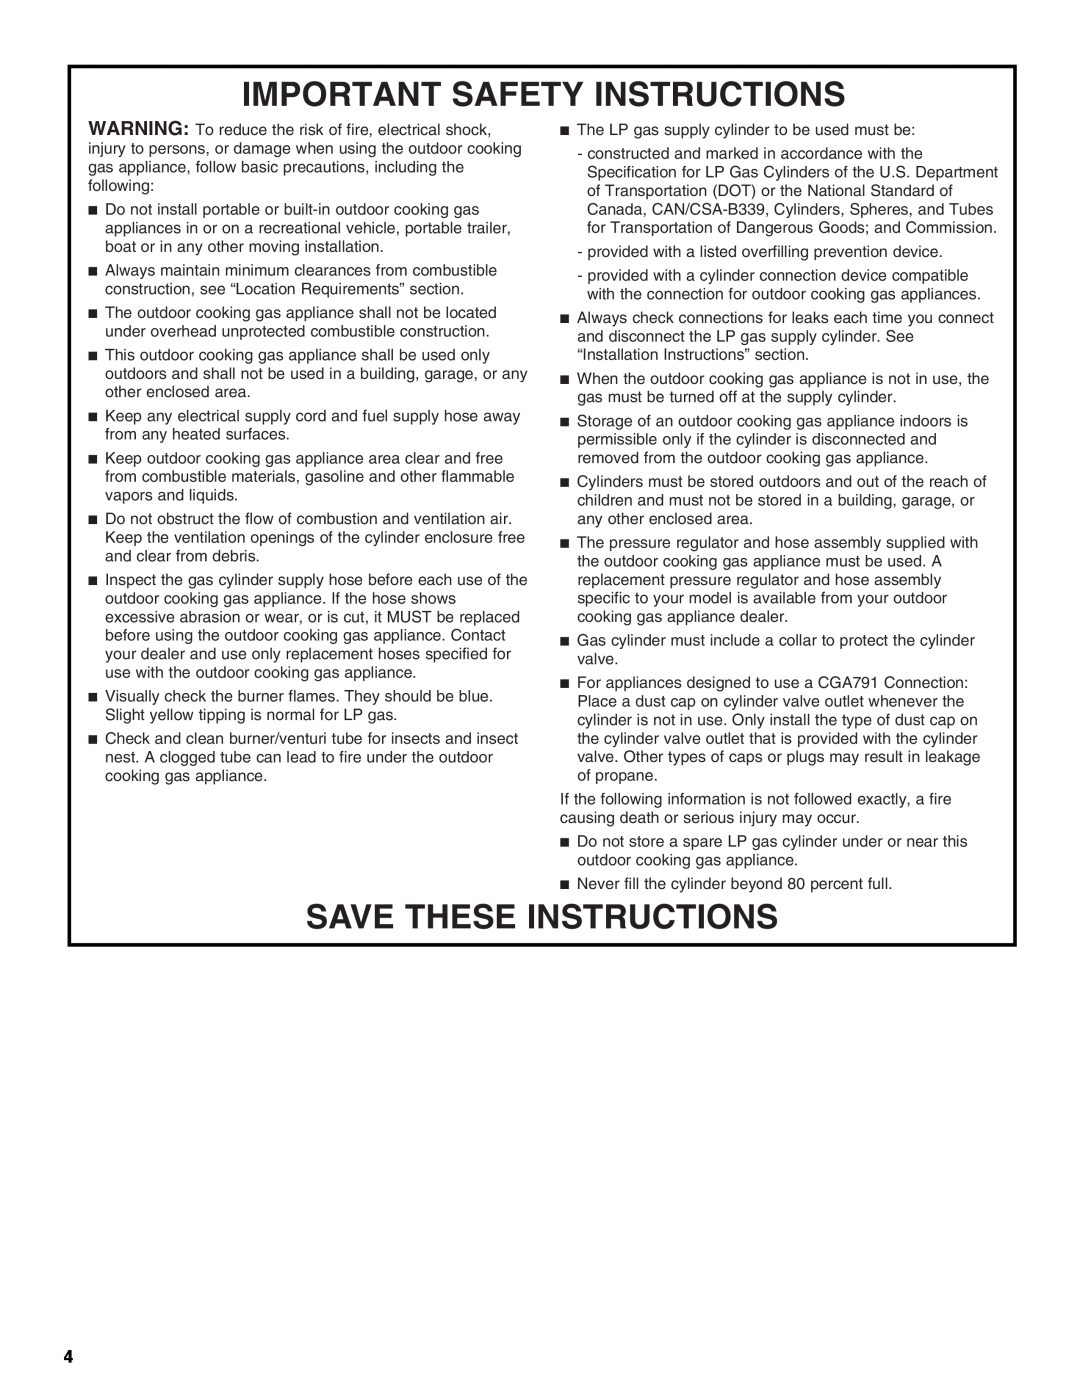 KitchenAid KBSU487T, KBSS361T, KBSU367T installation instructions Important Safety Instructions, Save These Instructions 